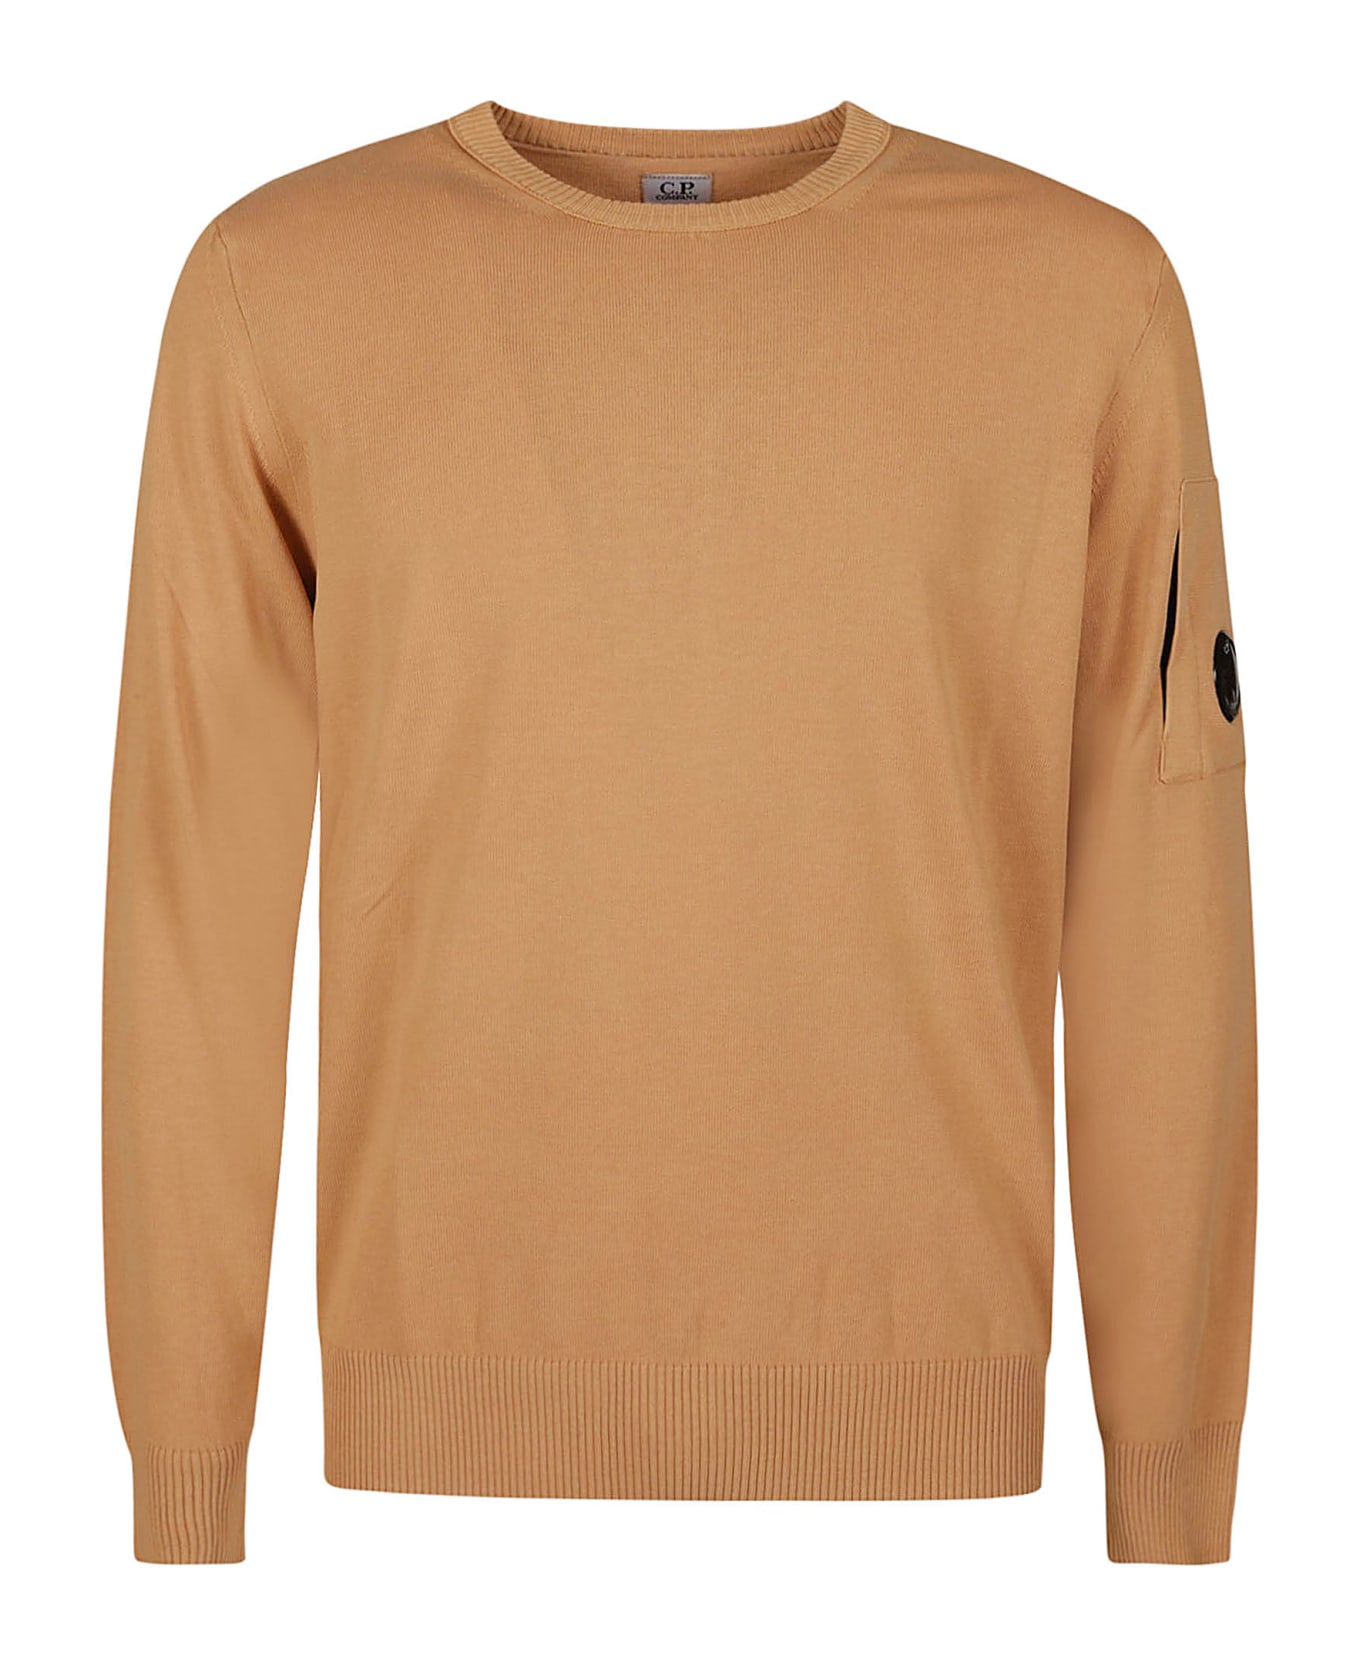 C.P. Company Old Dyed Crepe Sweatshirt - PASTRY SHELL フリース